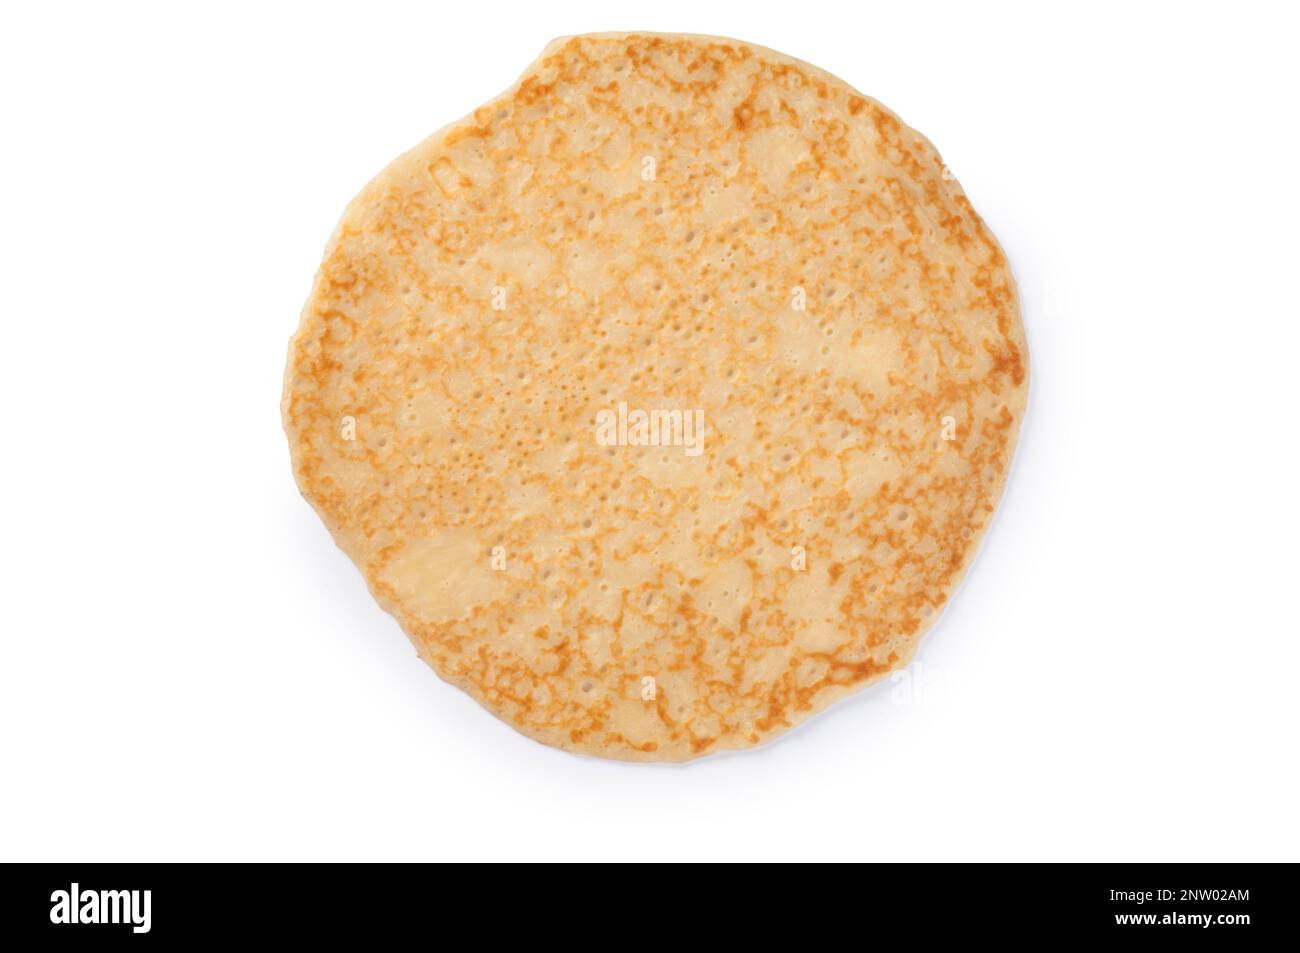 Studio shot of a handmade pancake cut out against a white background - John Gollop Stock Photo